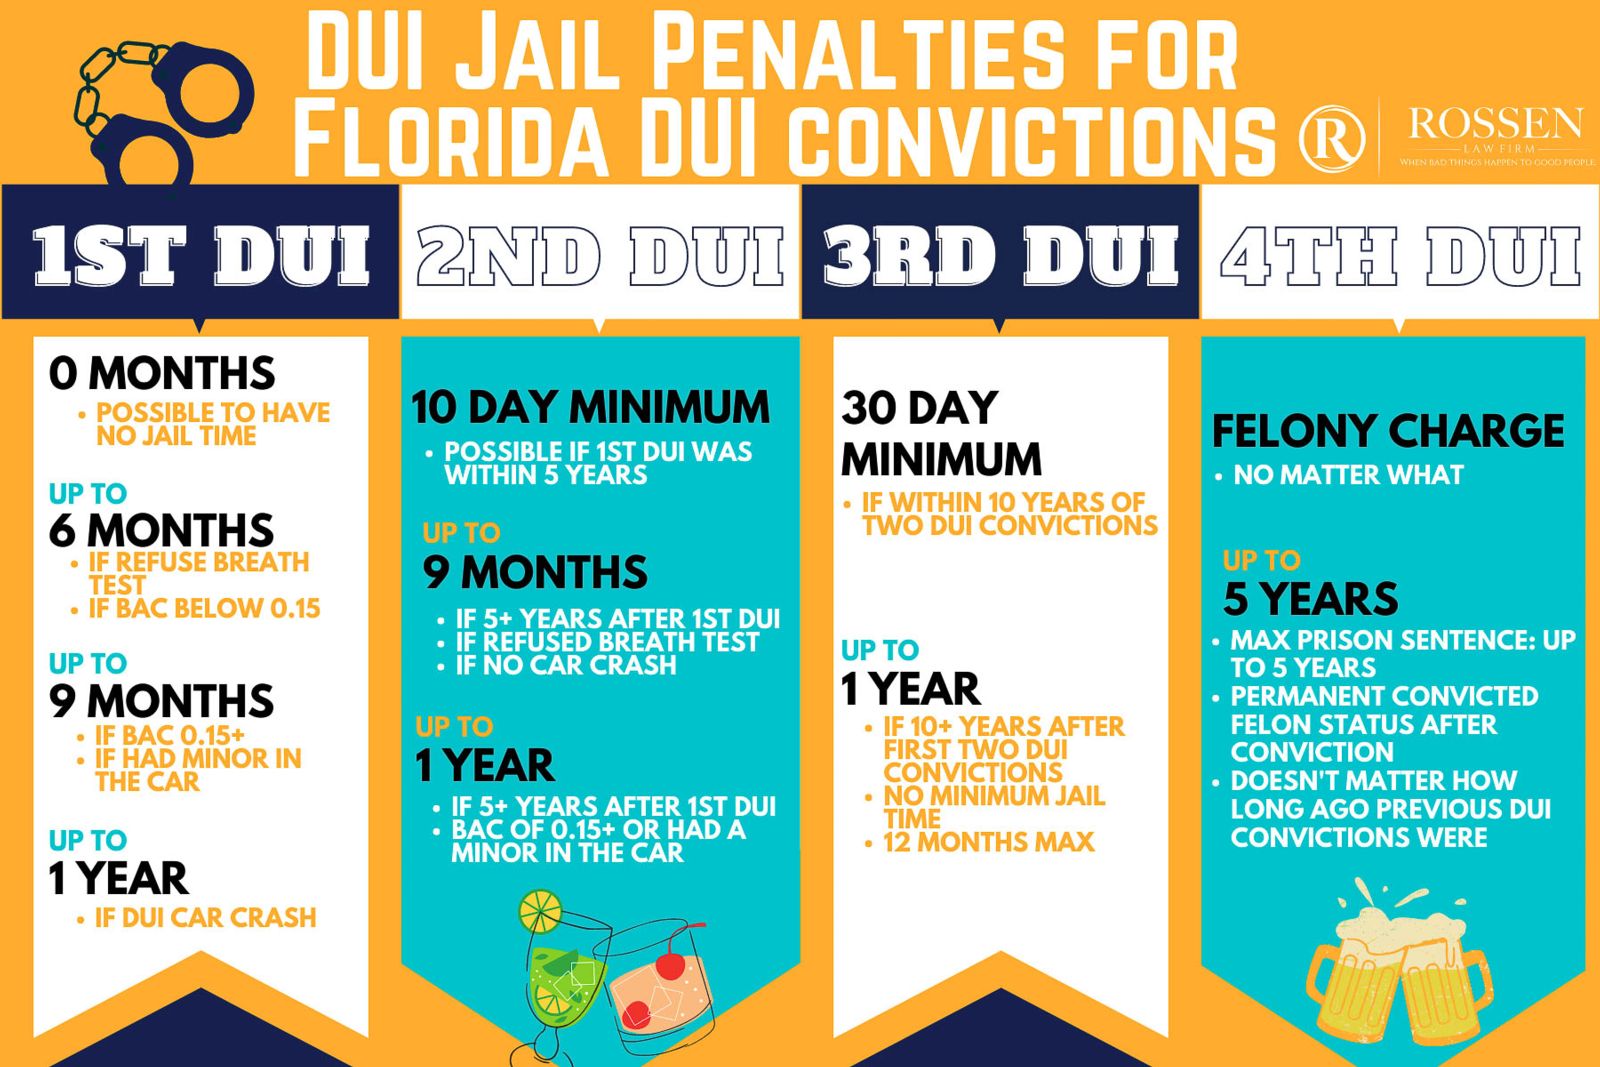 DUI jail penalties for a Florida or Fort Lauderdale DUI